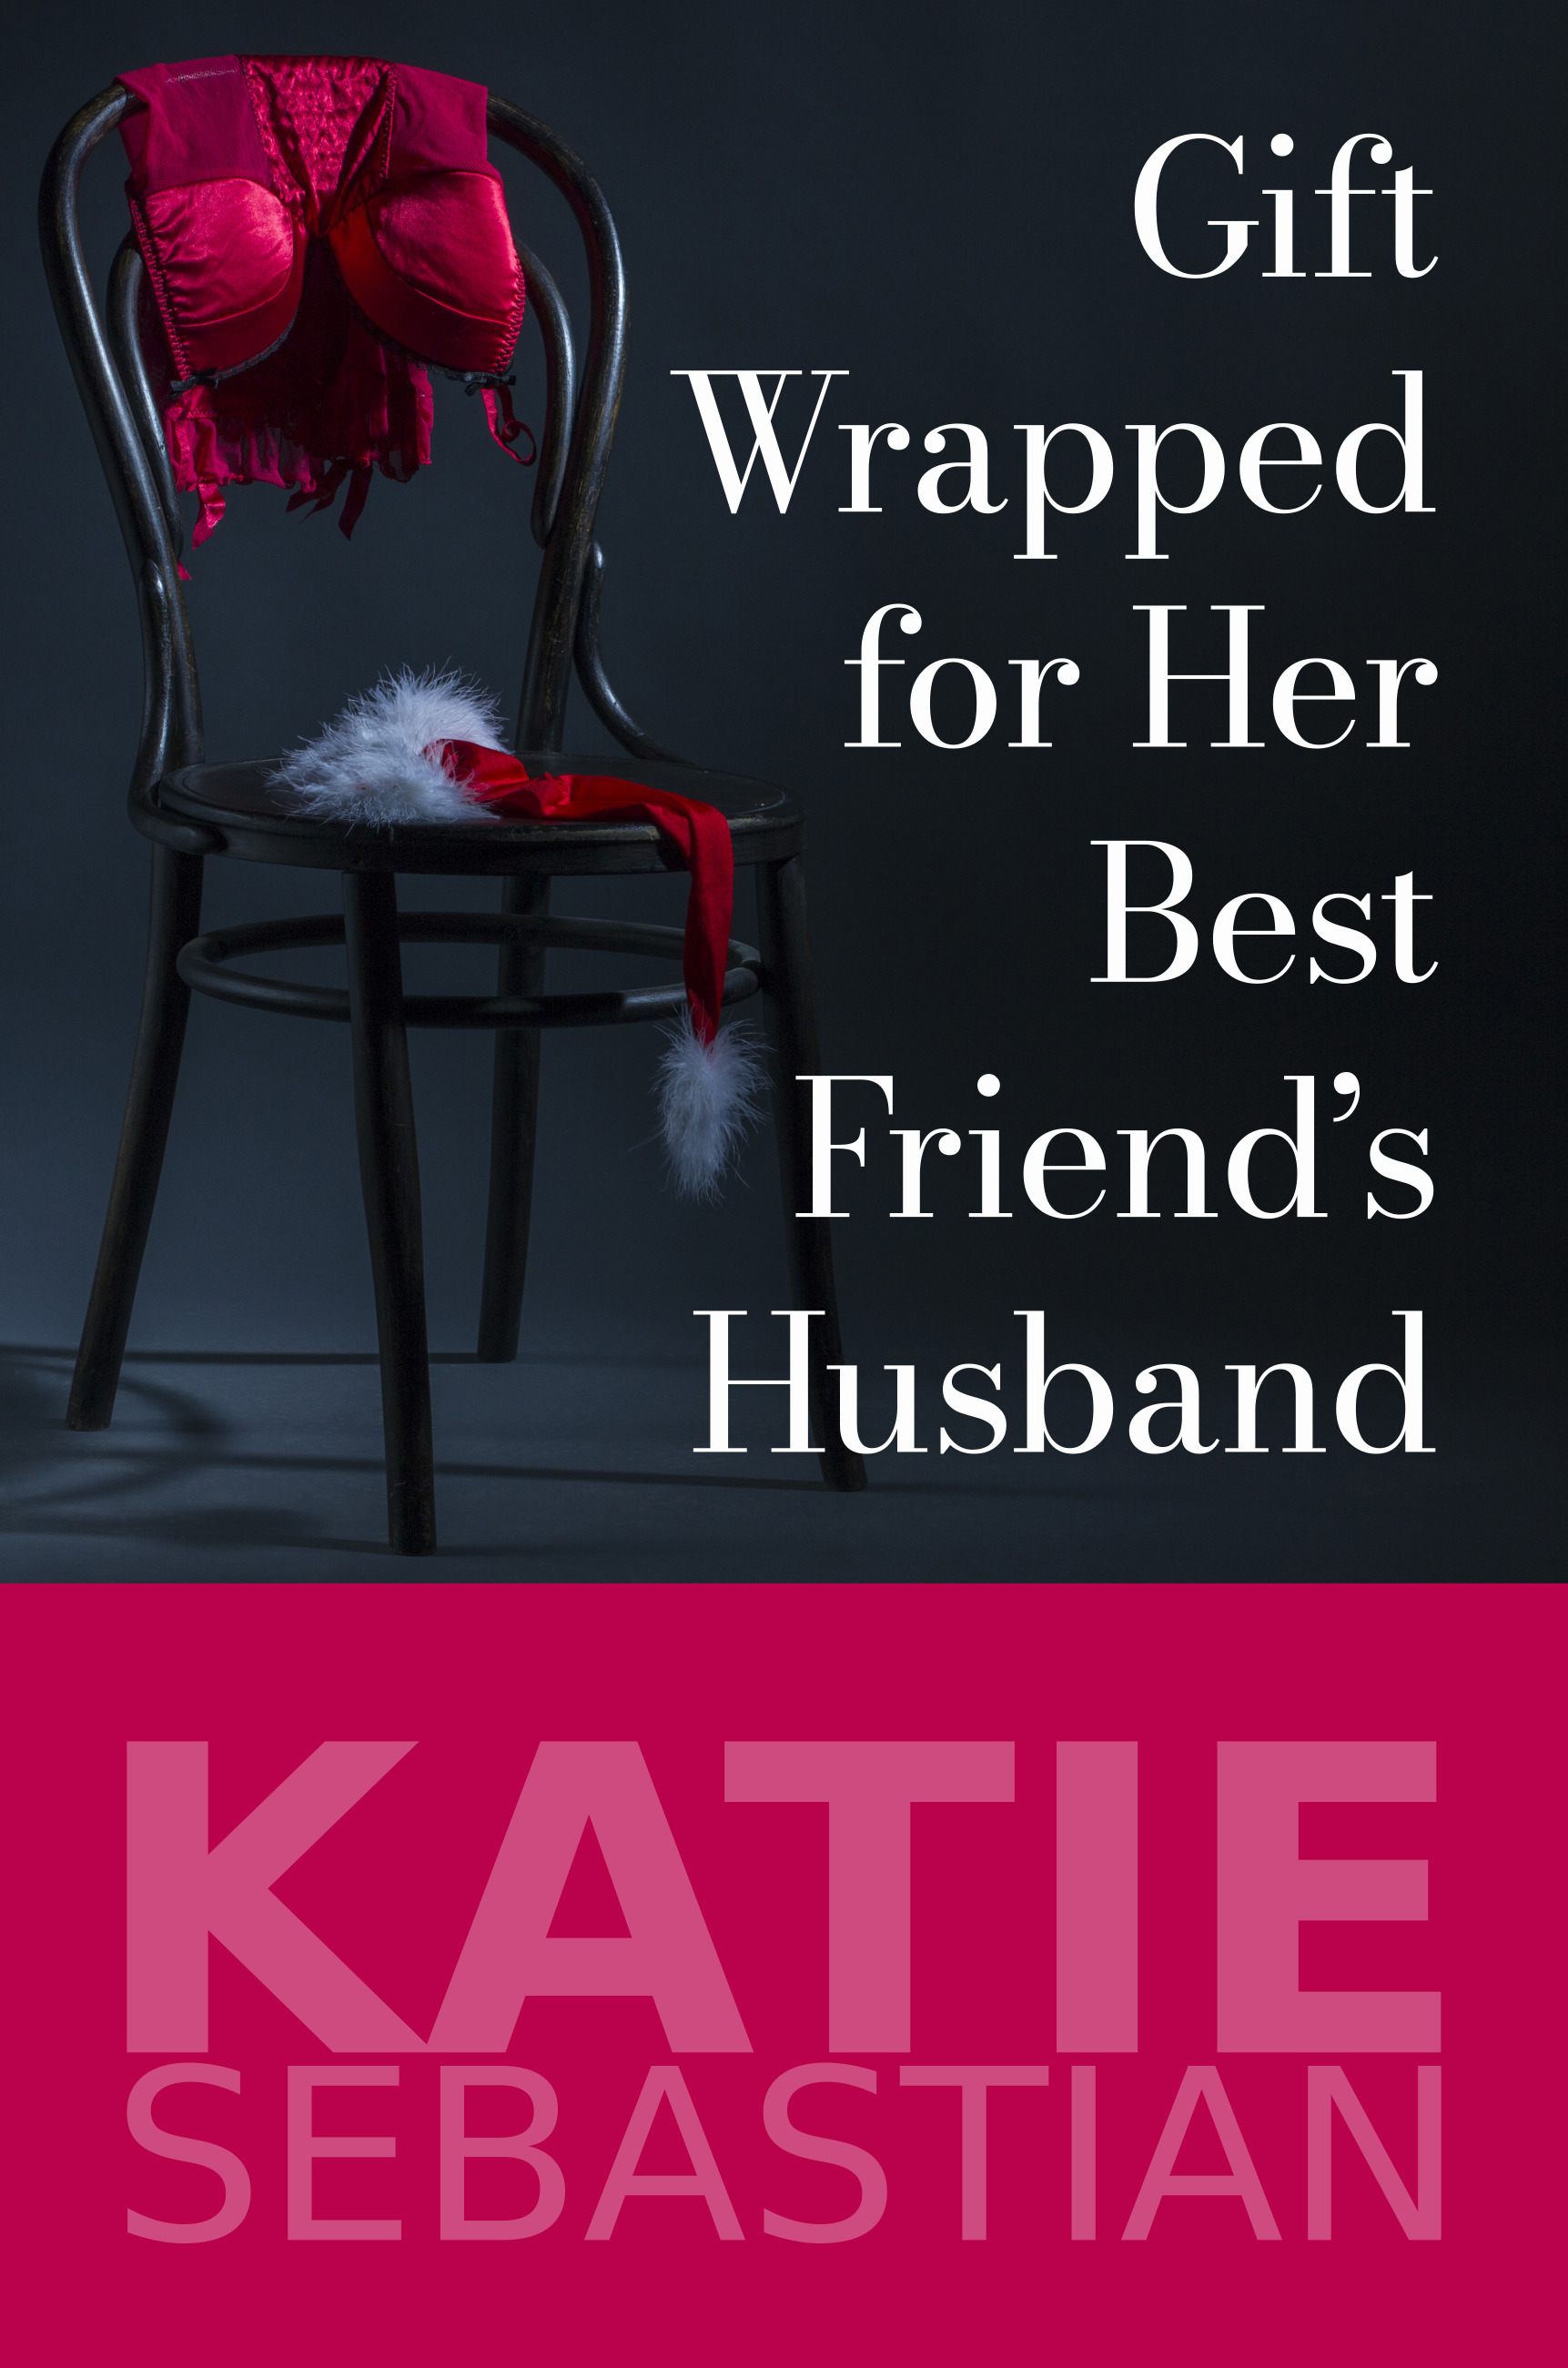 Gift Wrapped for Her Best Friend's Husband cover